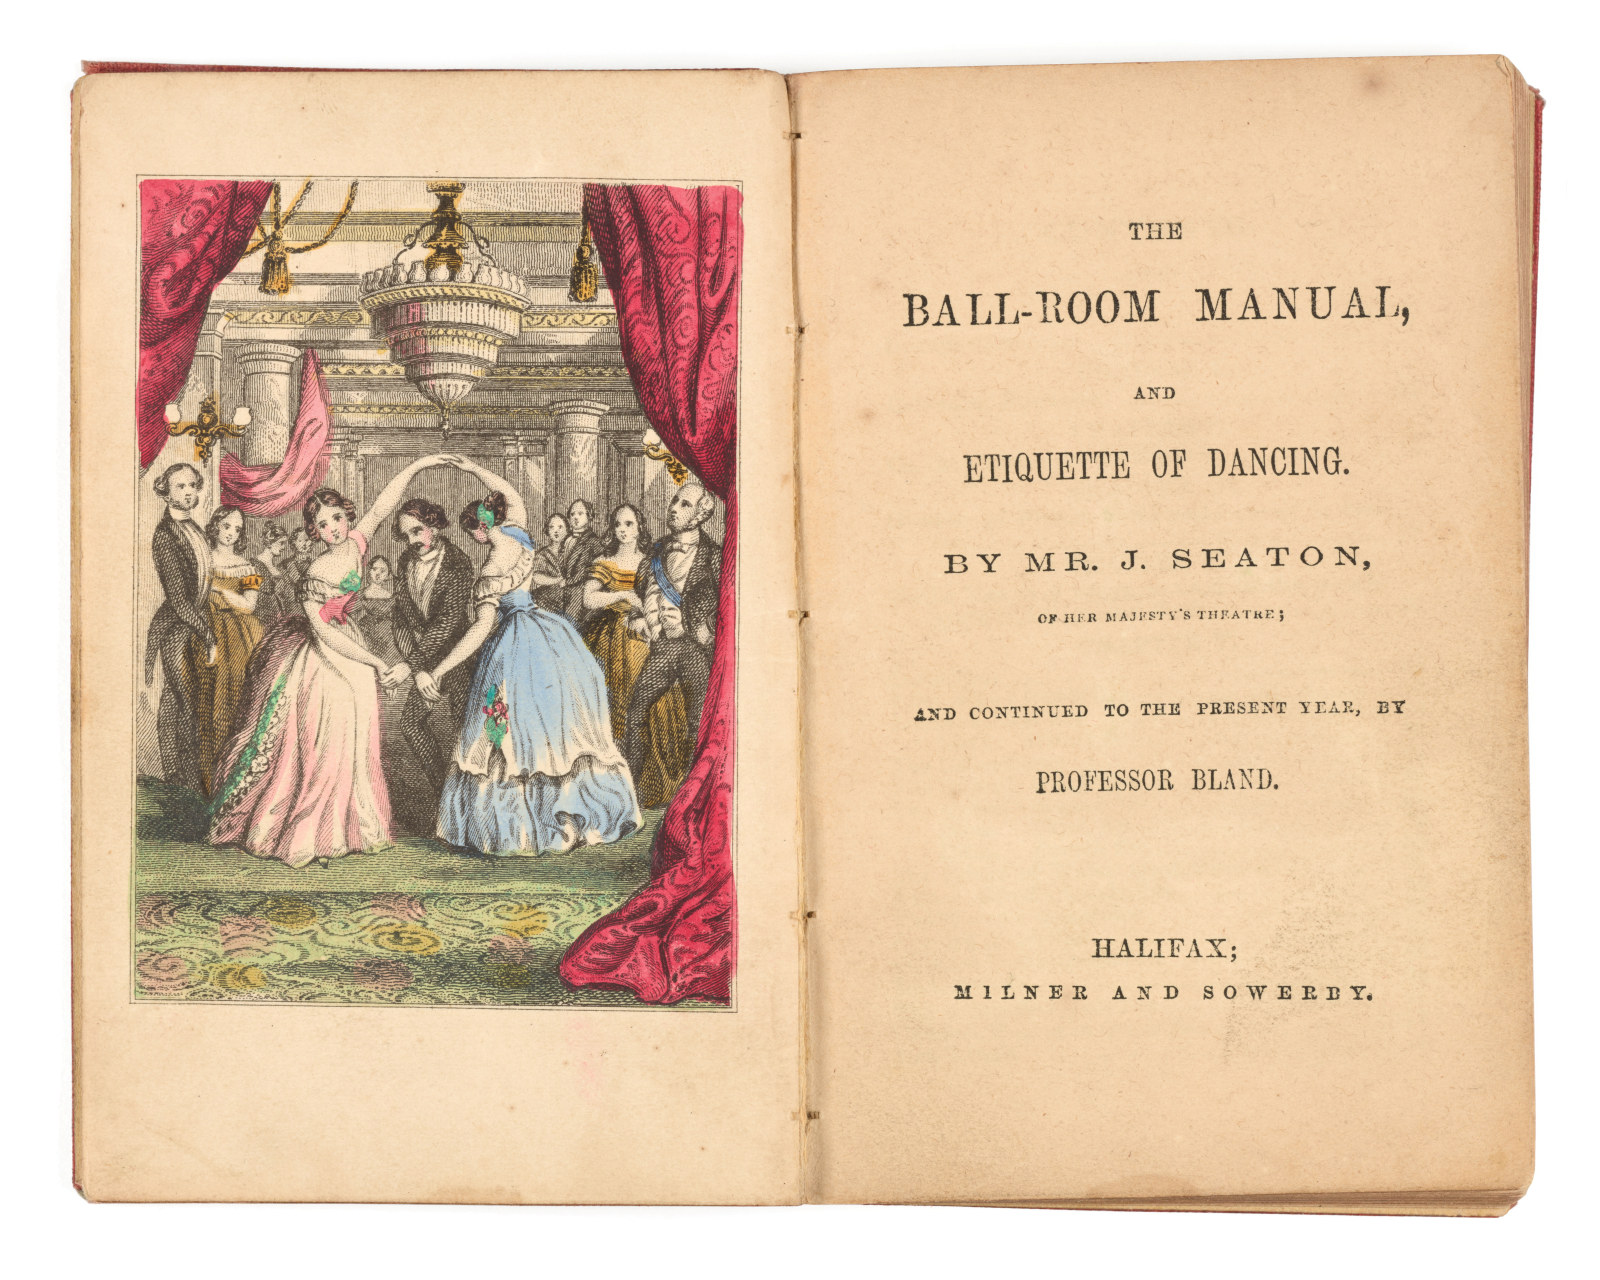 Illustration of two women dancing in a ball room